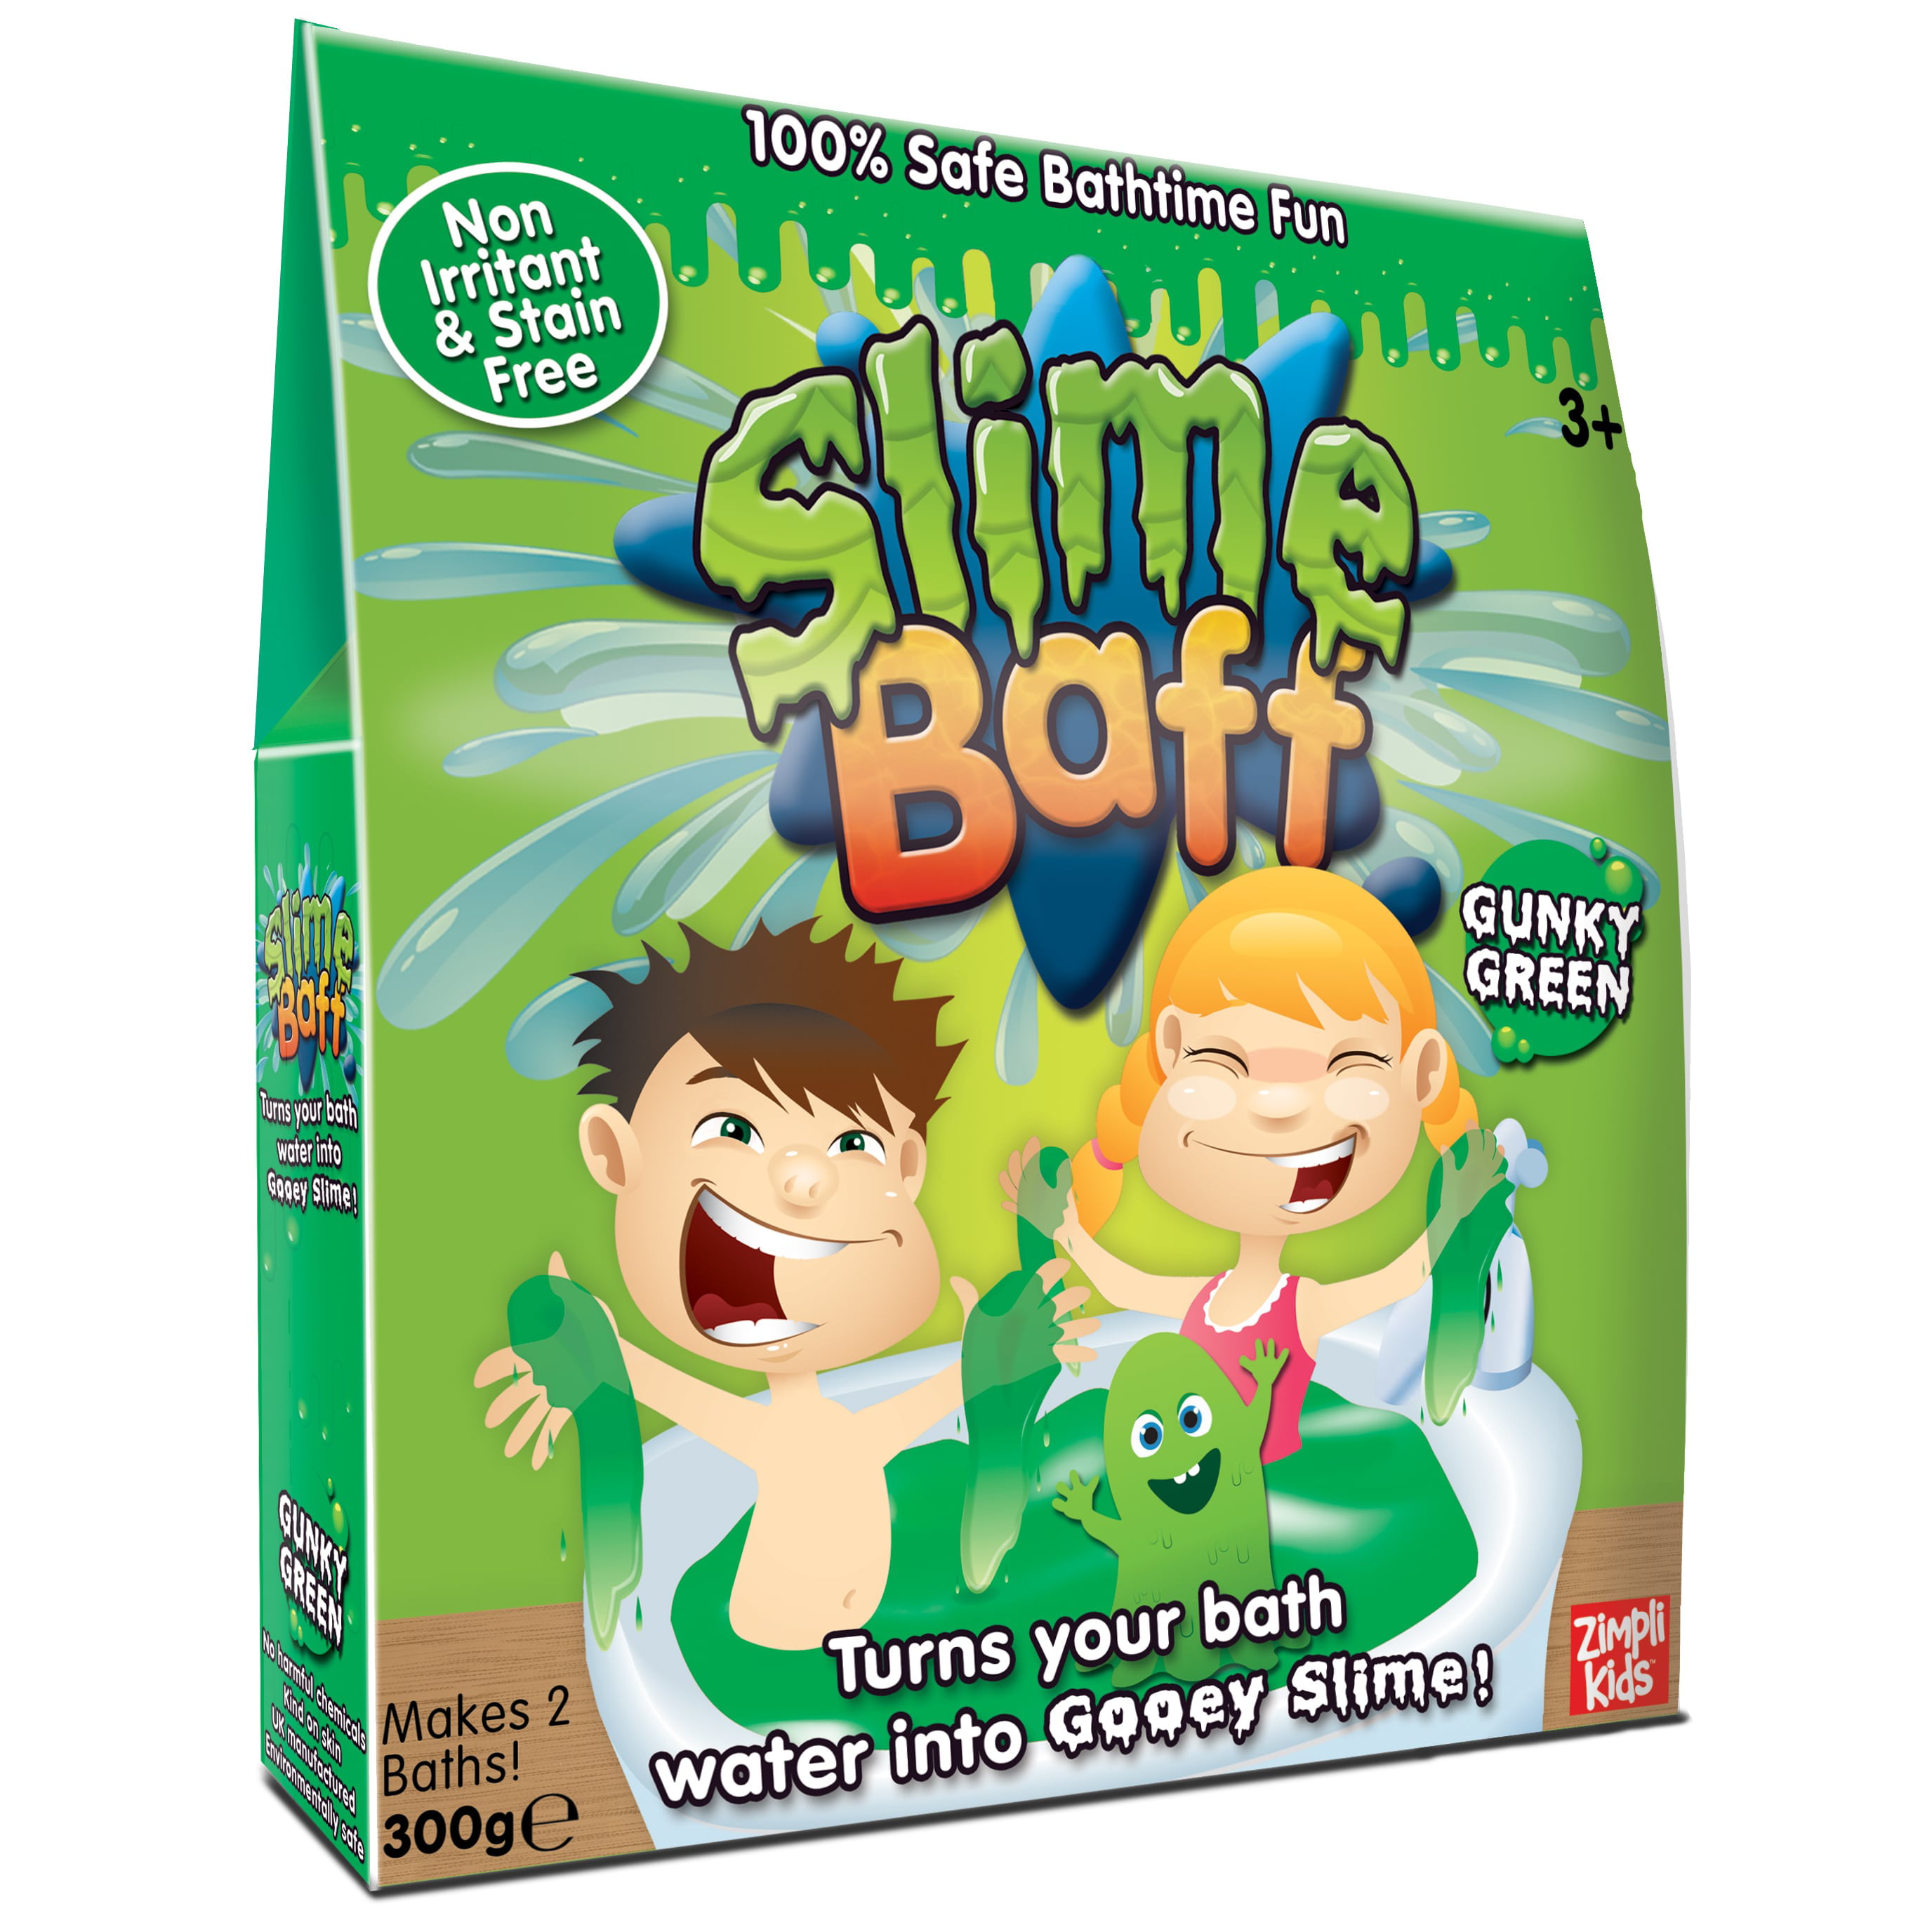 Gooey bath of Slime! Slime Baff  Turn your boring water into an exciting  slime bath with ZIMPLI KIDS SLIME BAFF! 🤩🛀🎉 ​Slime Baff safely turns  your bath water into a gooey